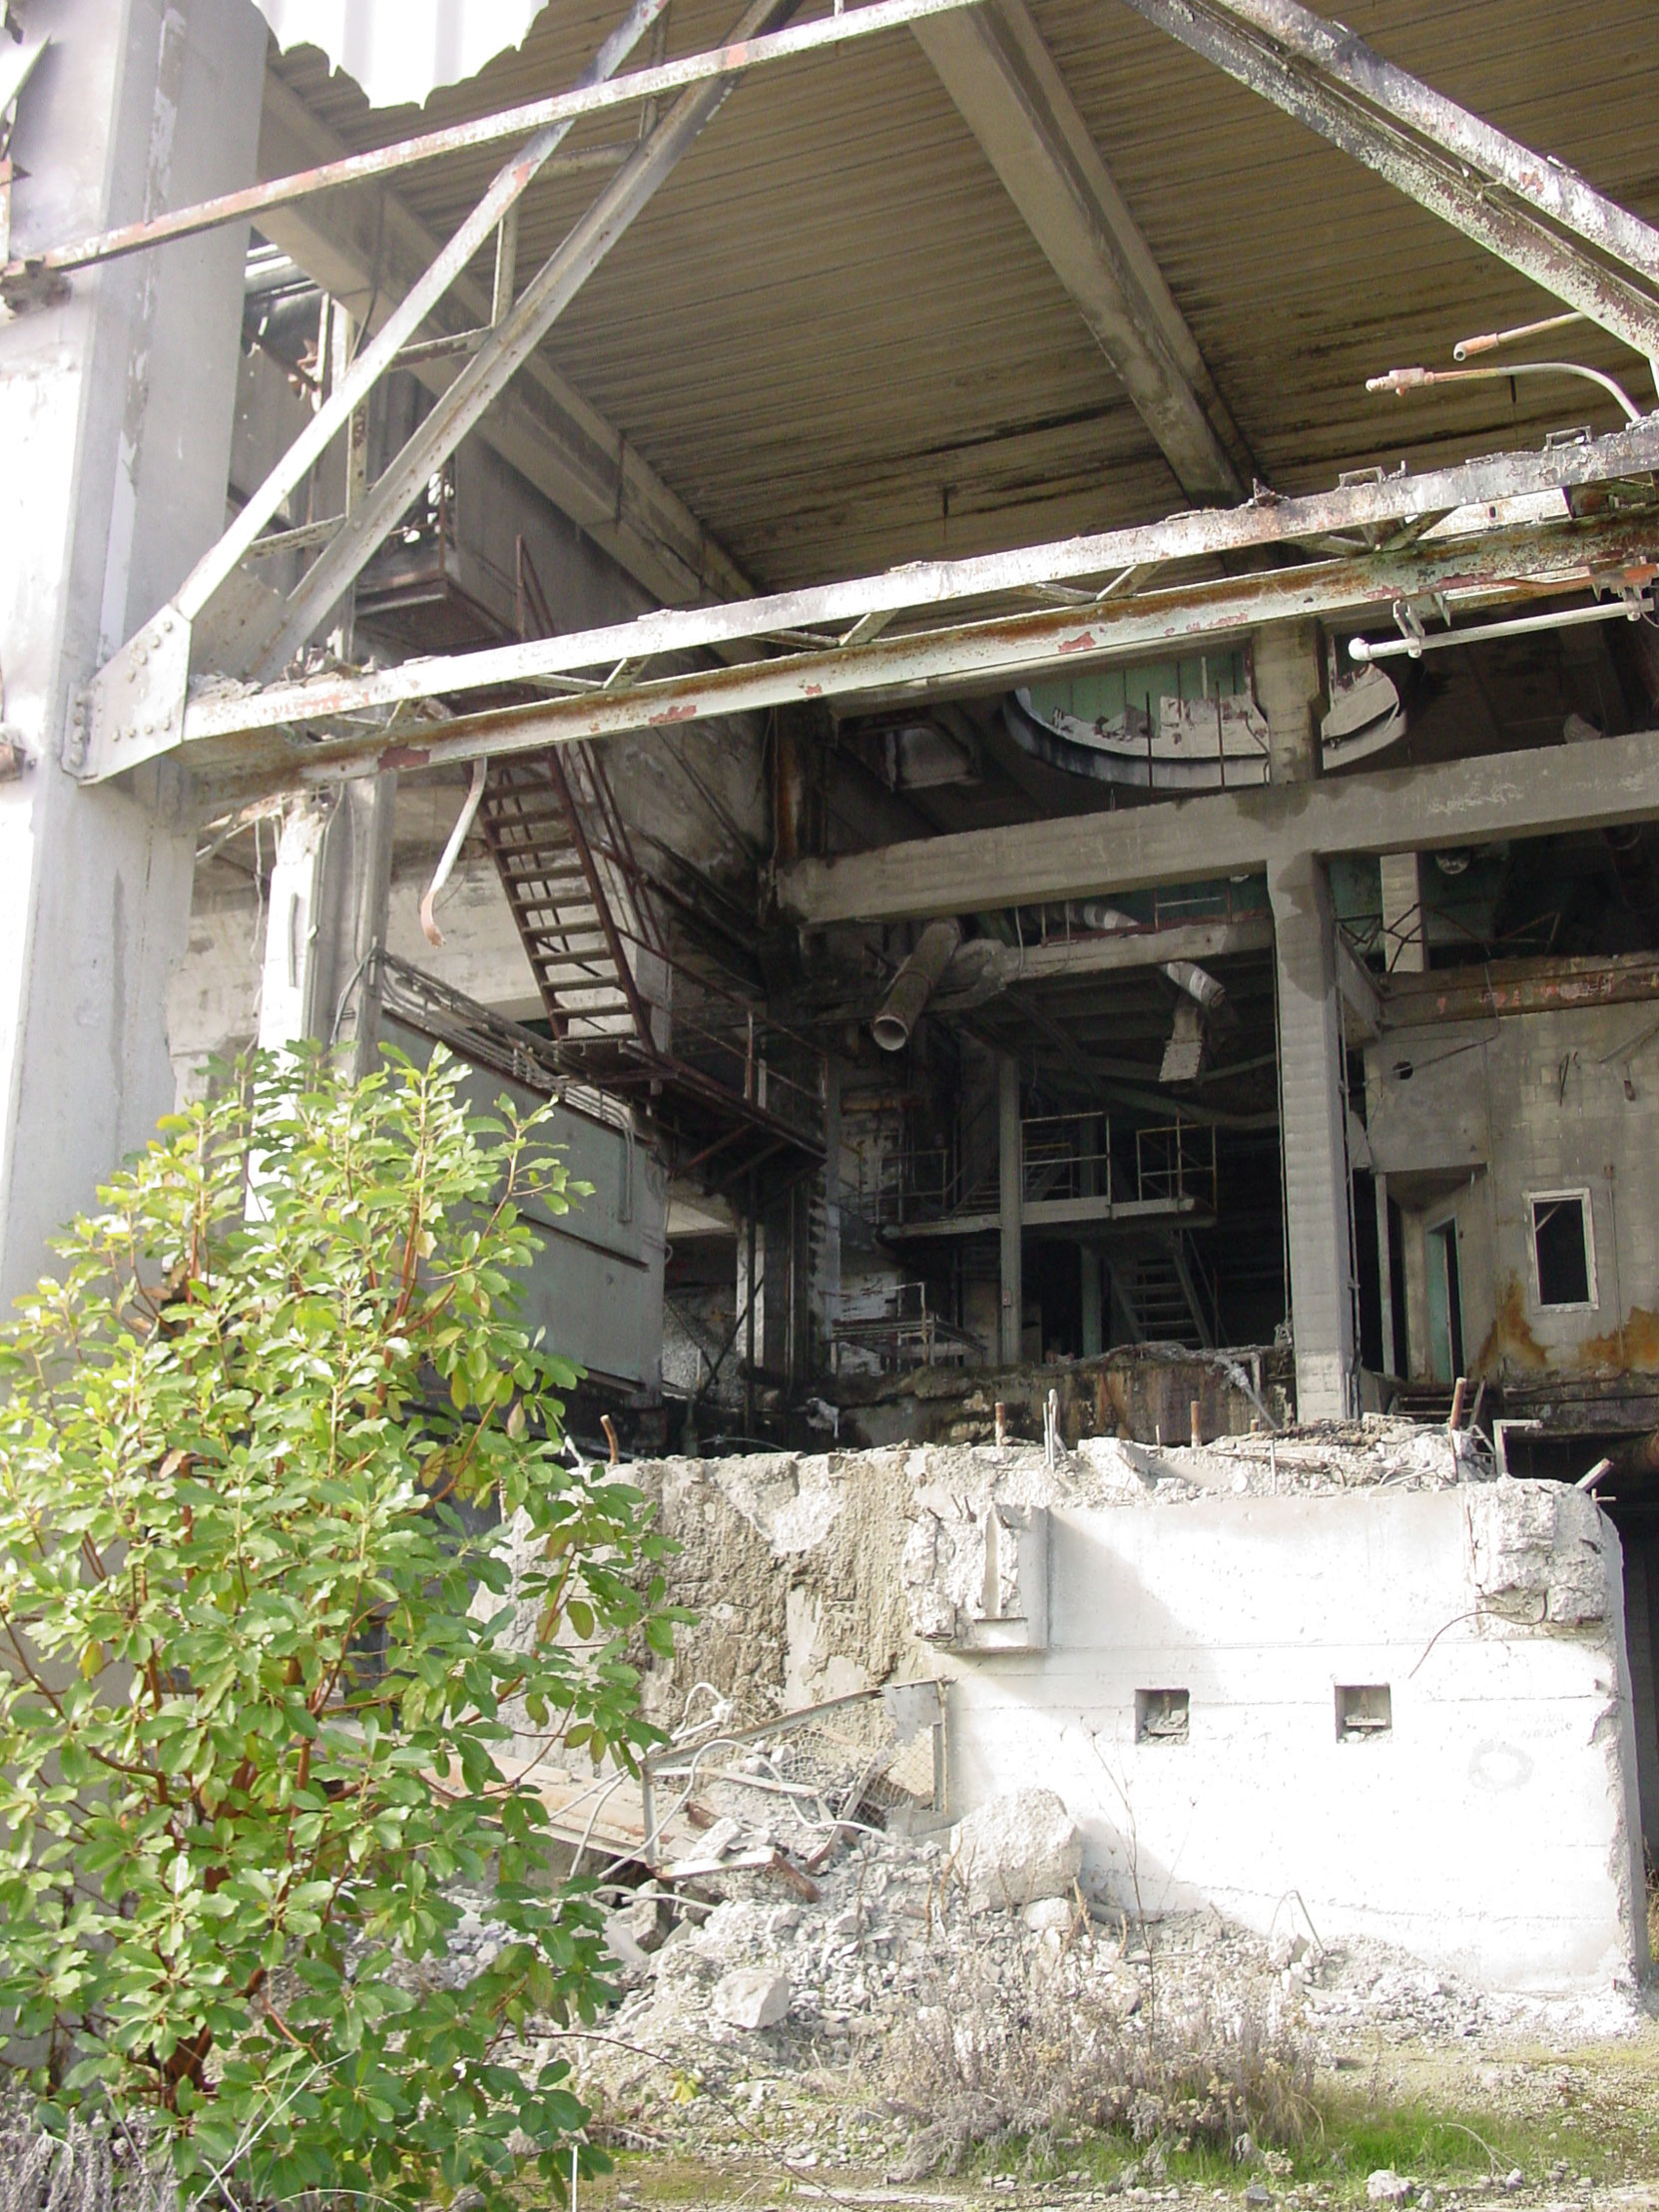 Bamberton cement factory ruins, 2004 (photo by author)